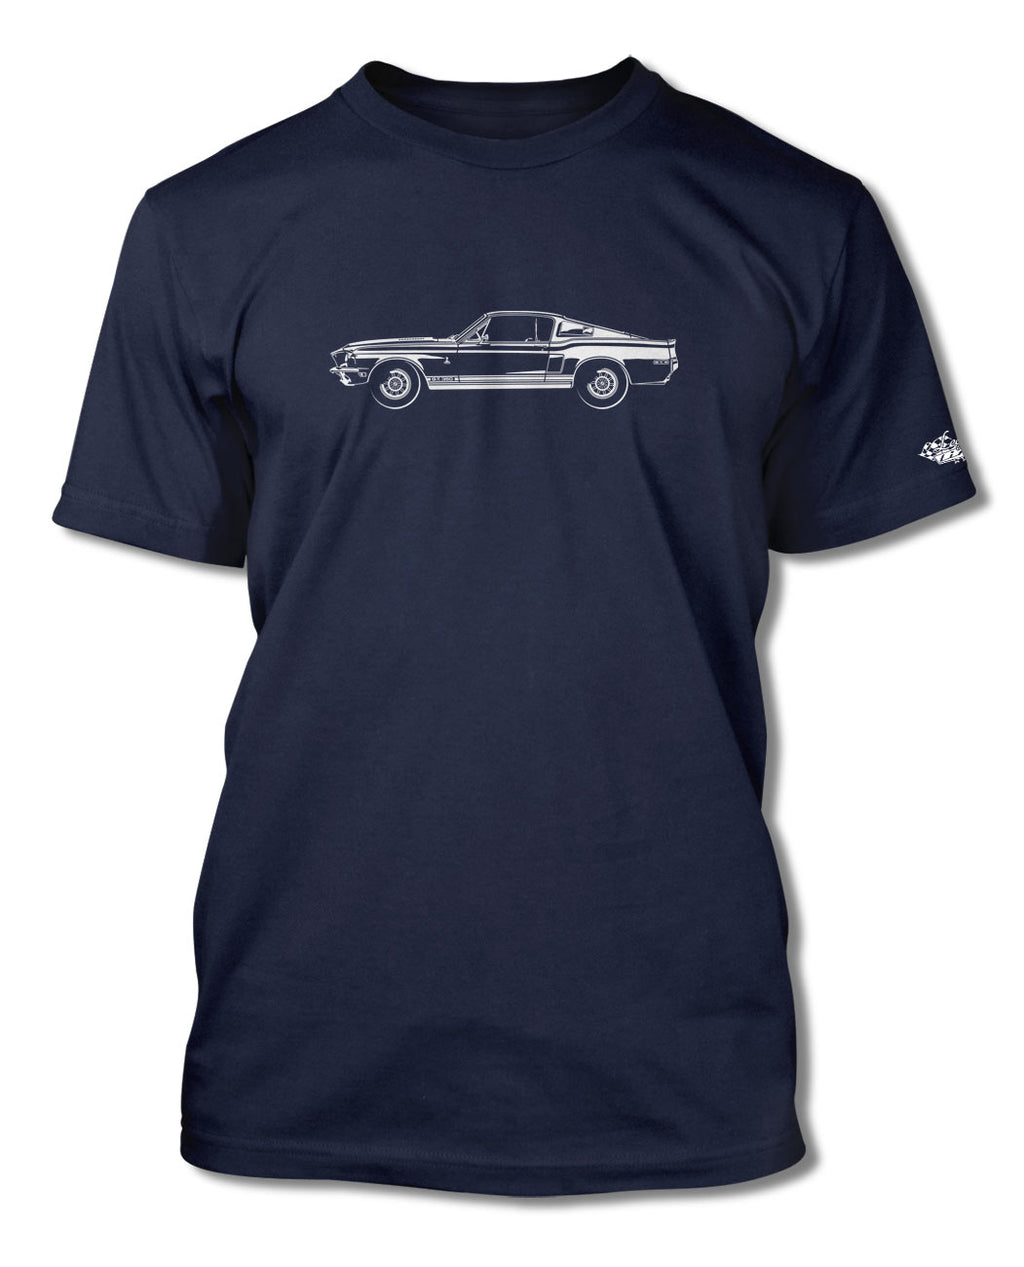 1968 Ford Mustang Shelby GT350 Fastback T-Shirt - Men - Side View